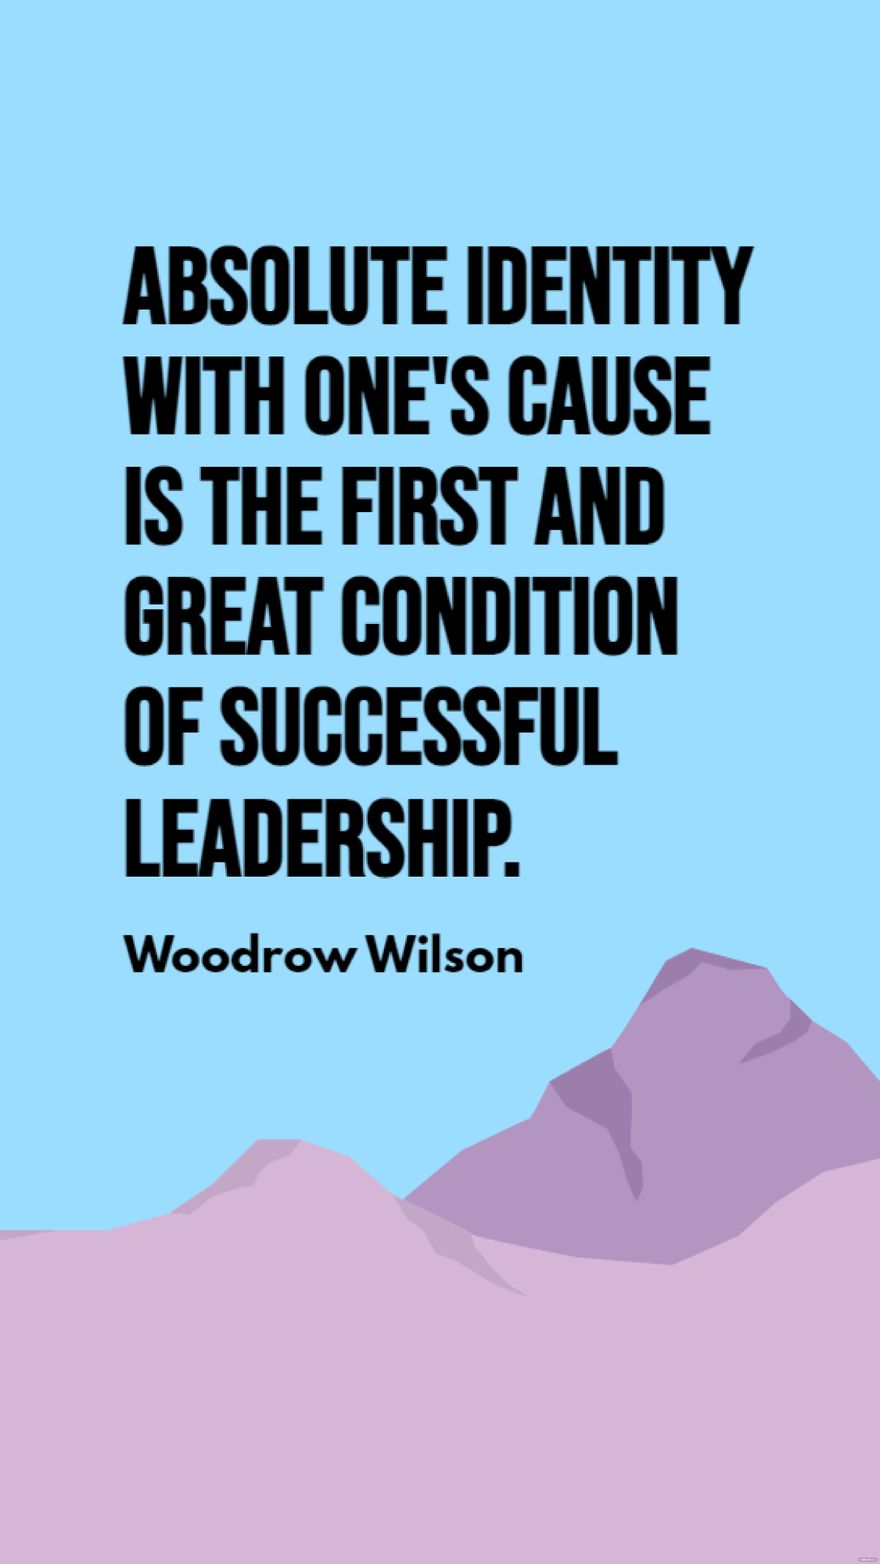 Woodrow Wilson - Absolute identity with one's cause is the first and great condition of successful leadership.